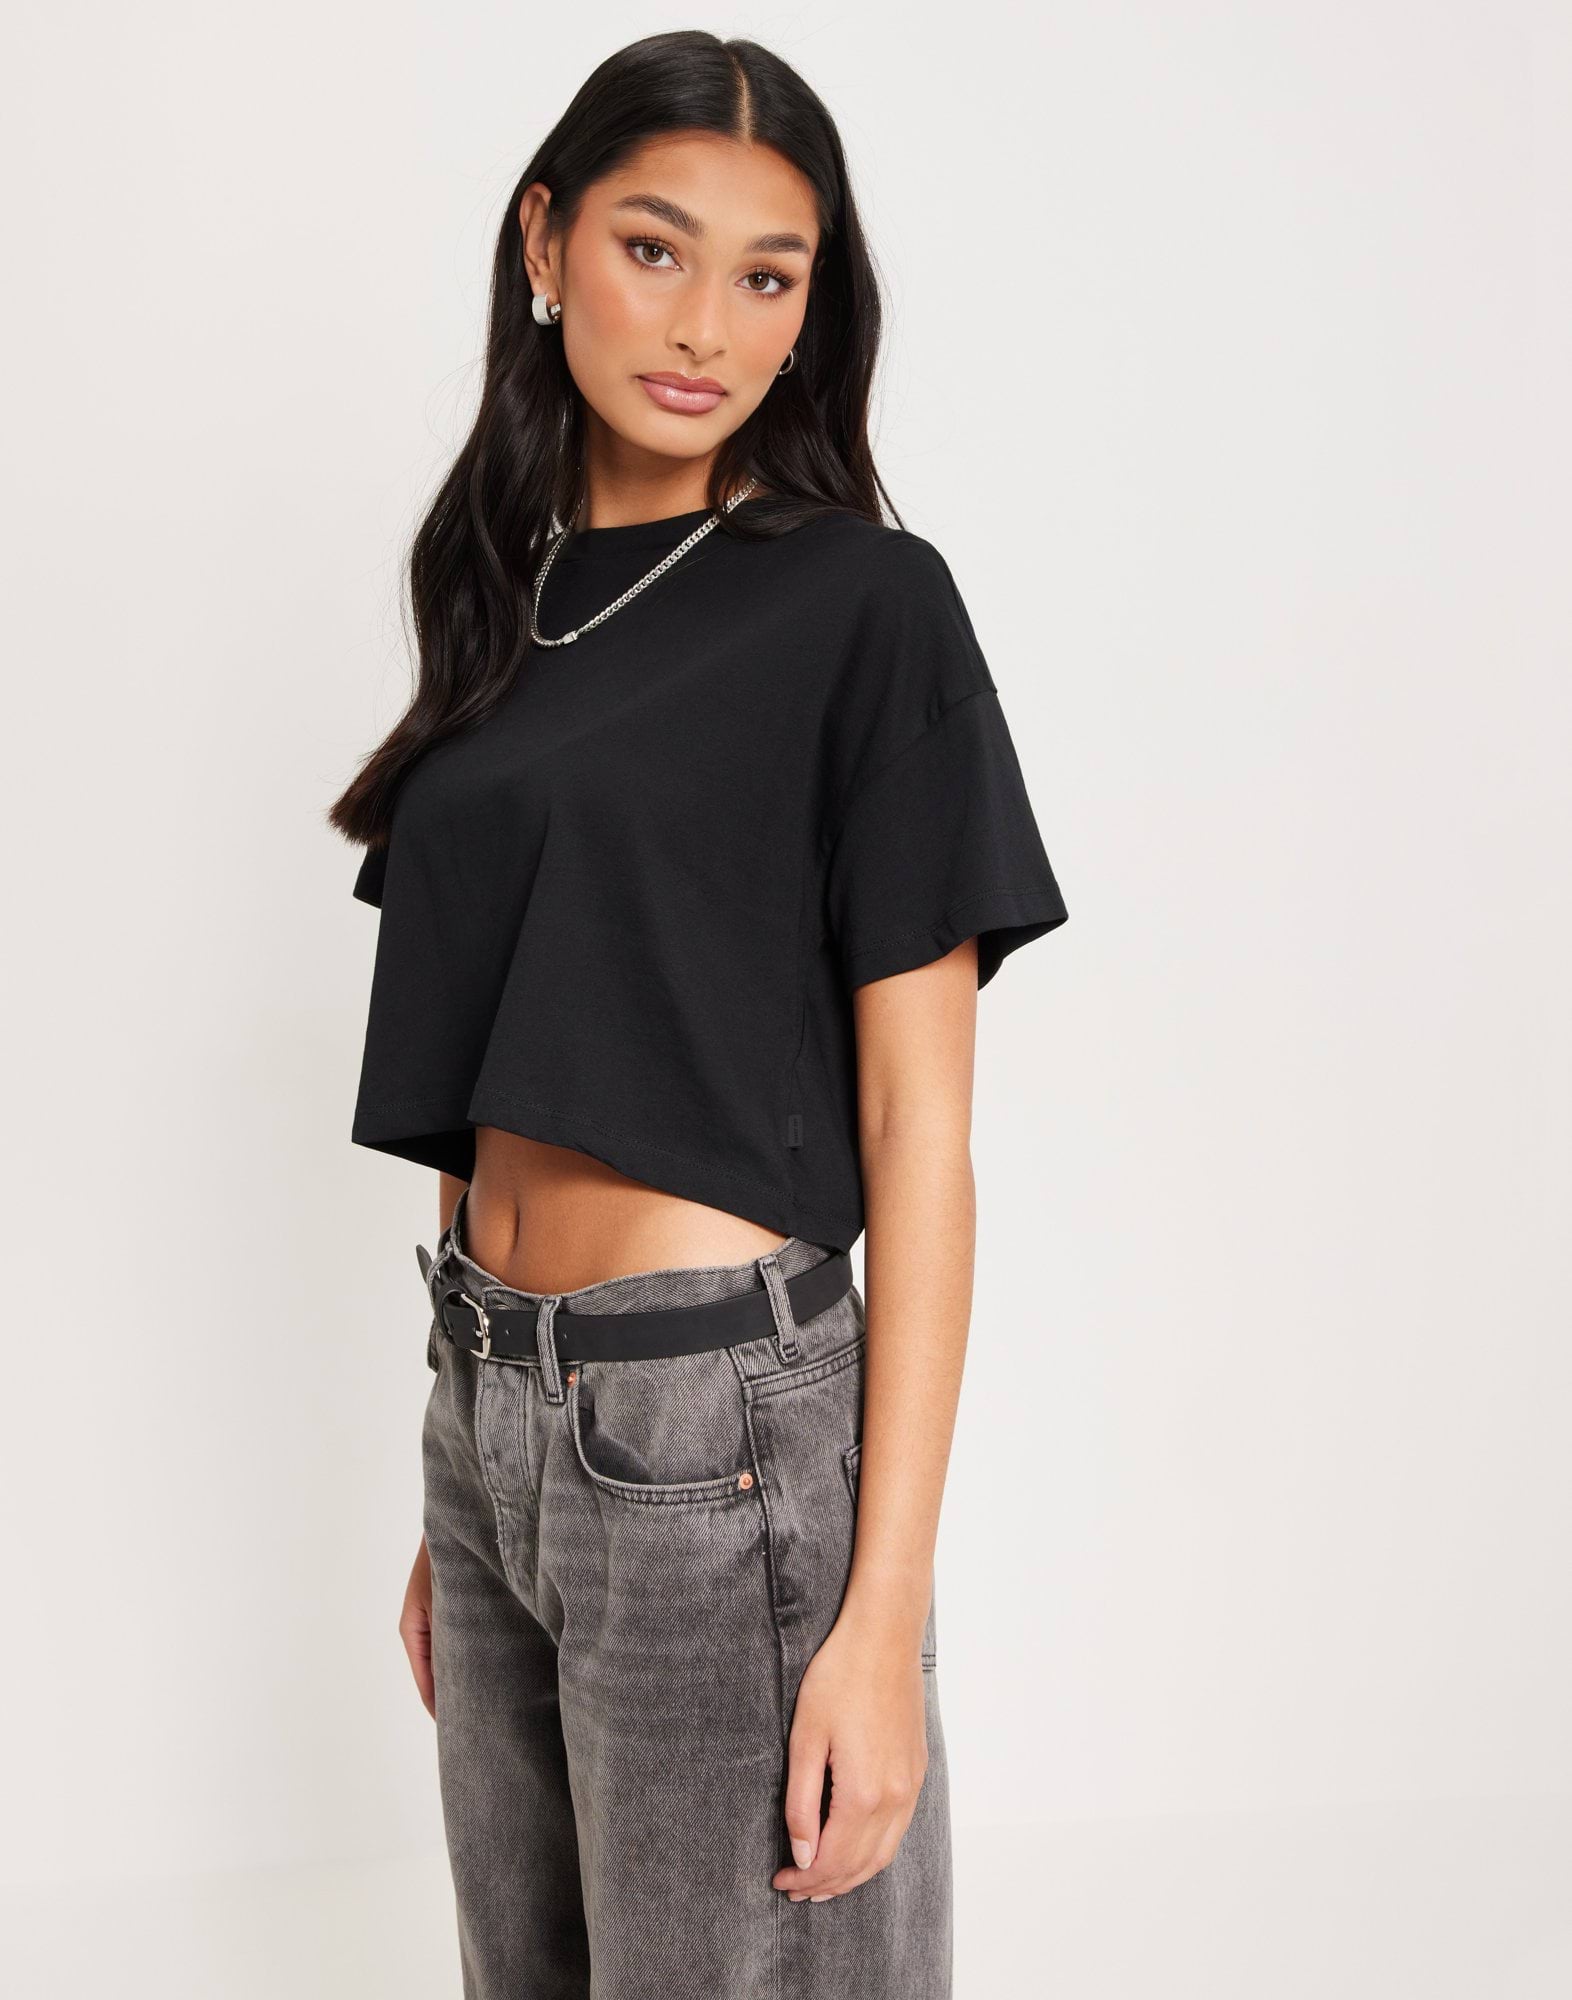 NMALENA S/S O-NECK SEMICROP TOP FWD